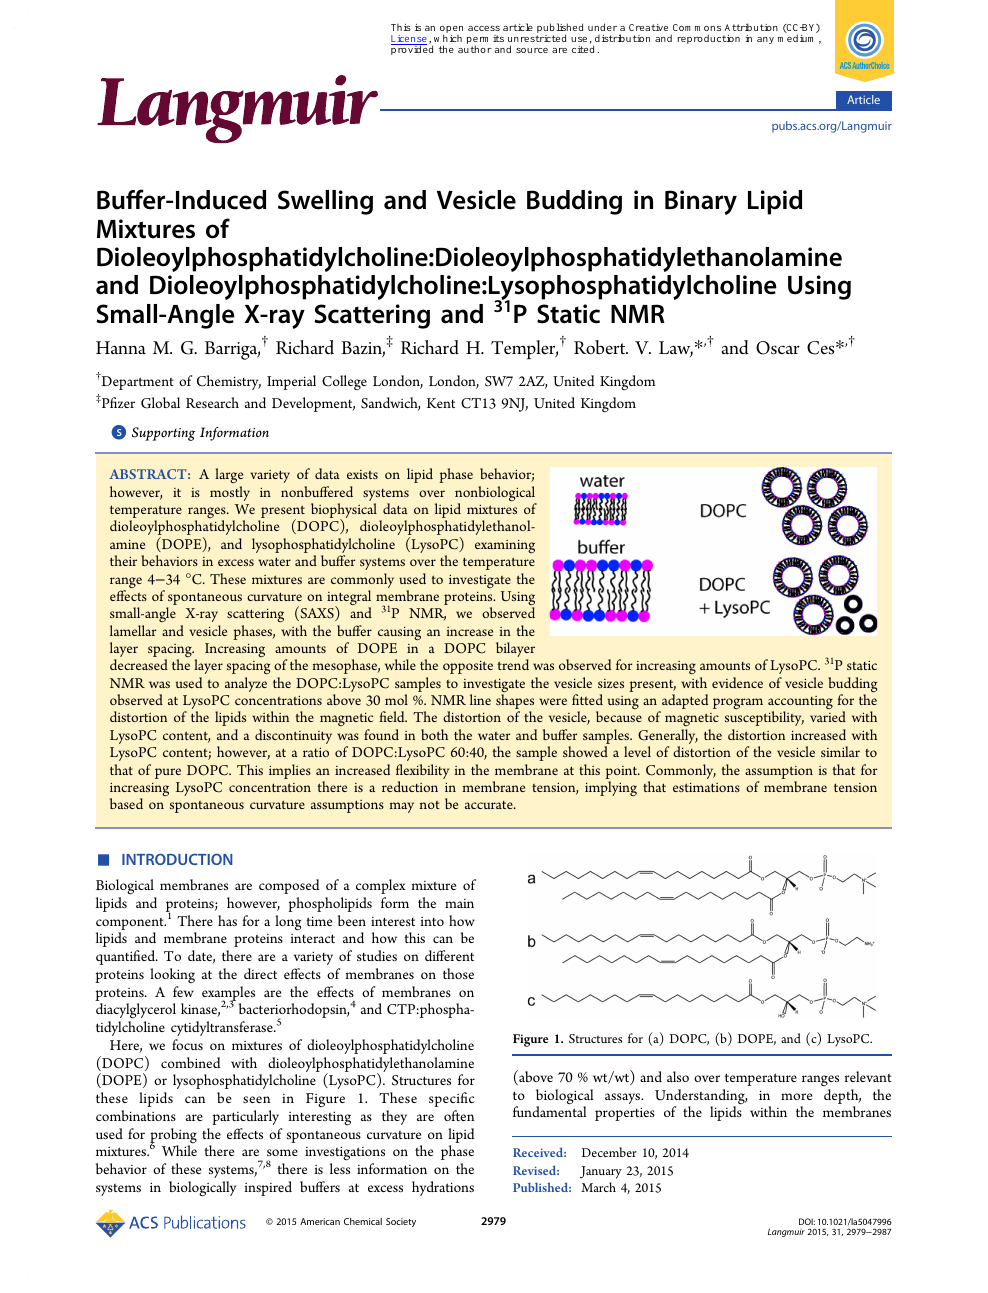 Buffer Induced Swelling And Vesicle Budding In Binary Lipid Mixtures Of Dioleoylphosphatidylcholine Dioleoylphosphatidylethanolamine And Dioleoylphosphatidylcholine Lysophosphatidylcholine Using Small Angle X Ray Scattering And 31 P Static Nmr Topic